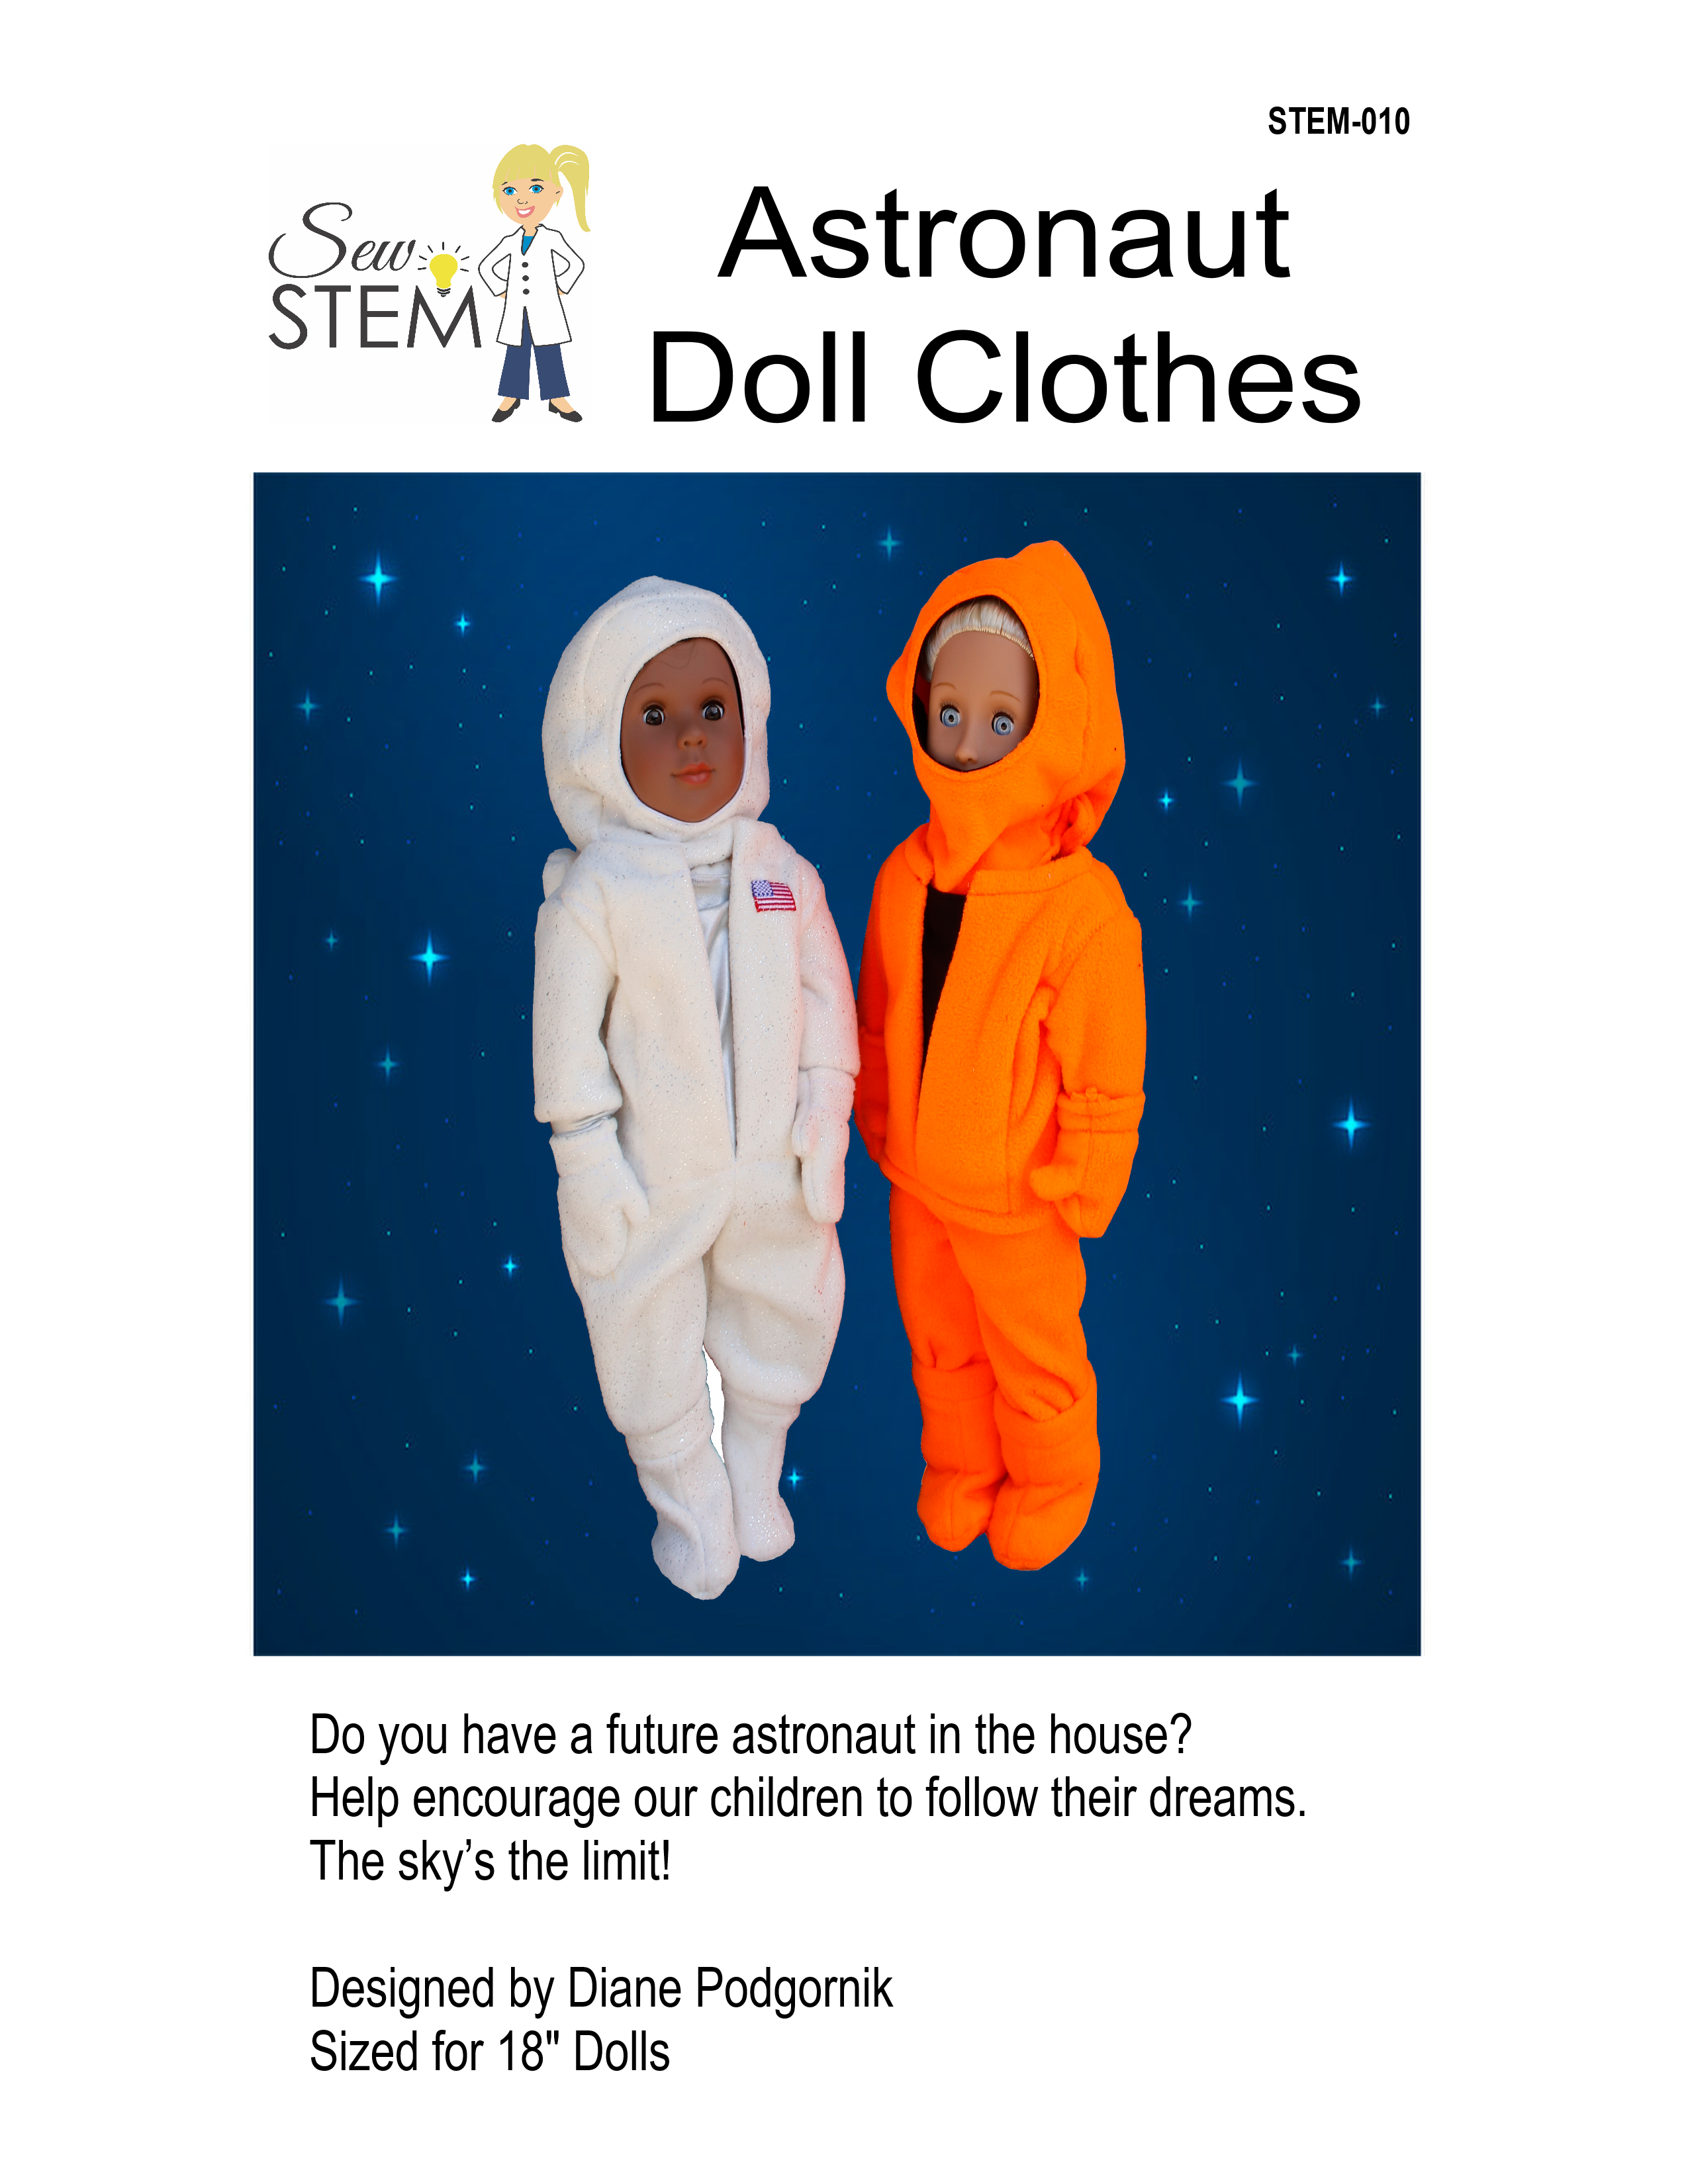 Astronaut Doll Clothes